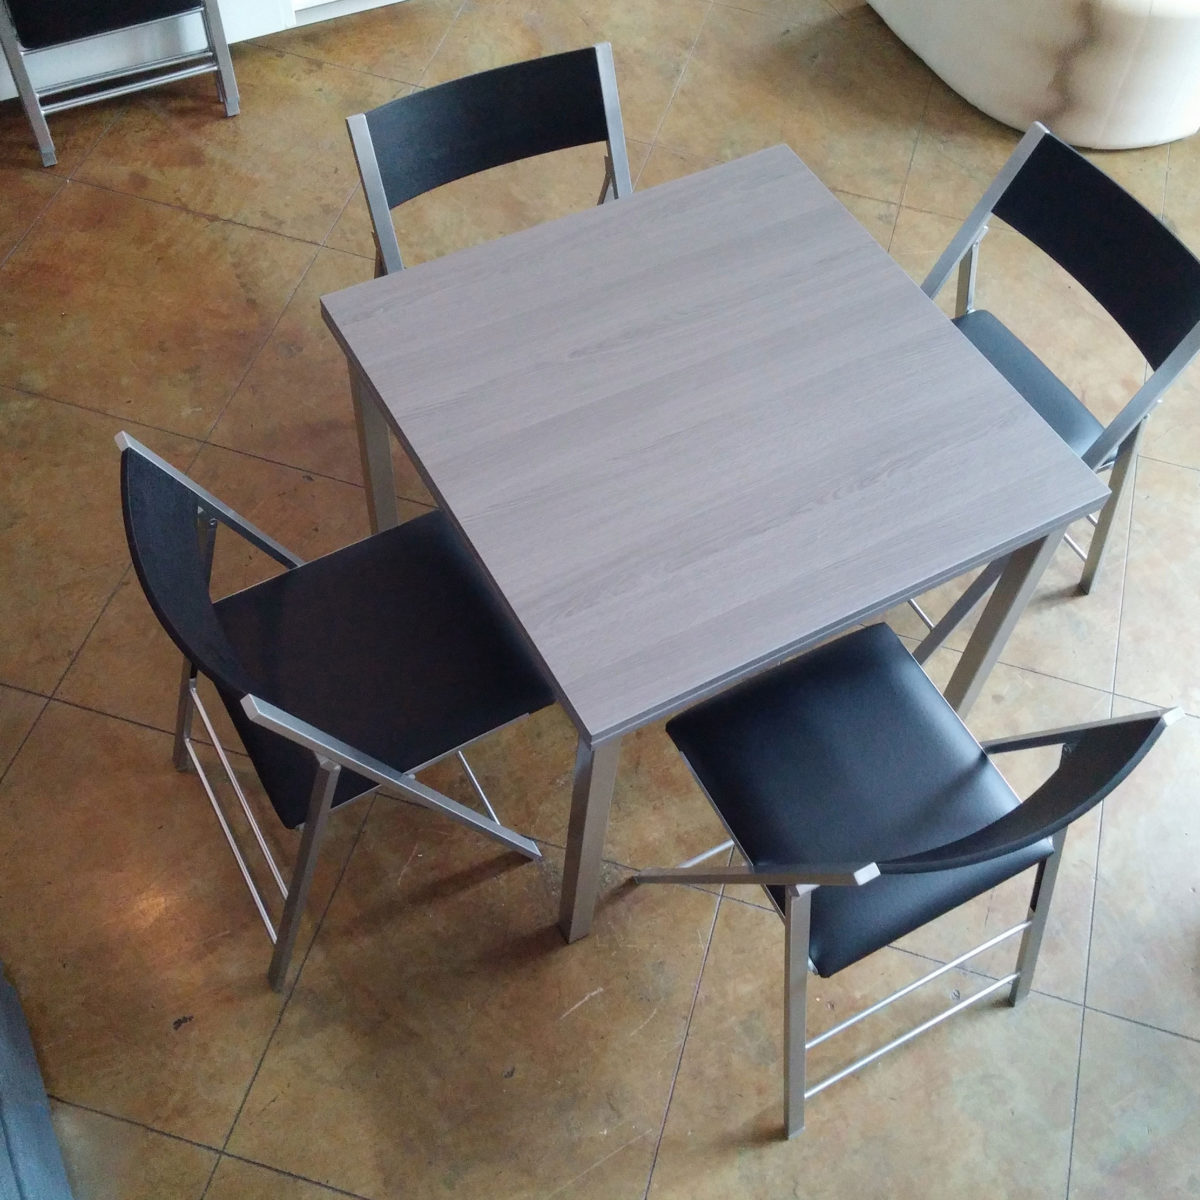 Converting Echo Square Table With 4 Black Folding Chairs 1 1200x1200 